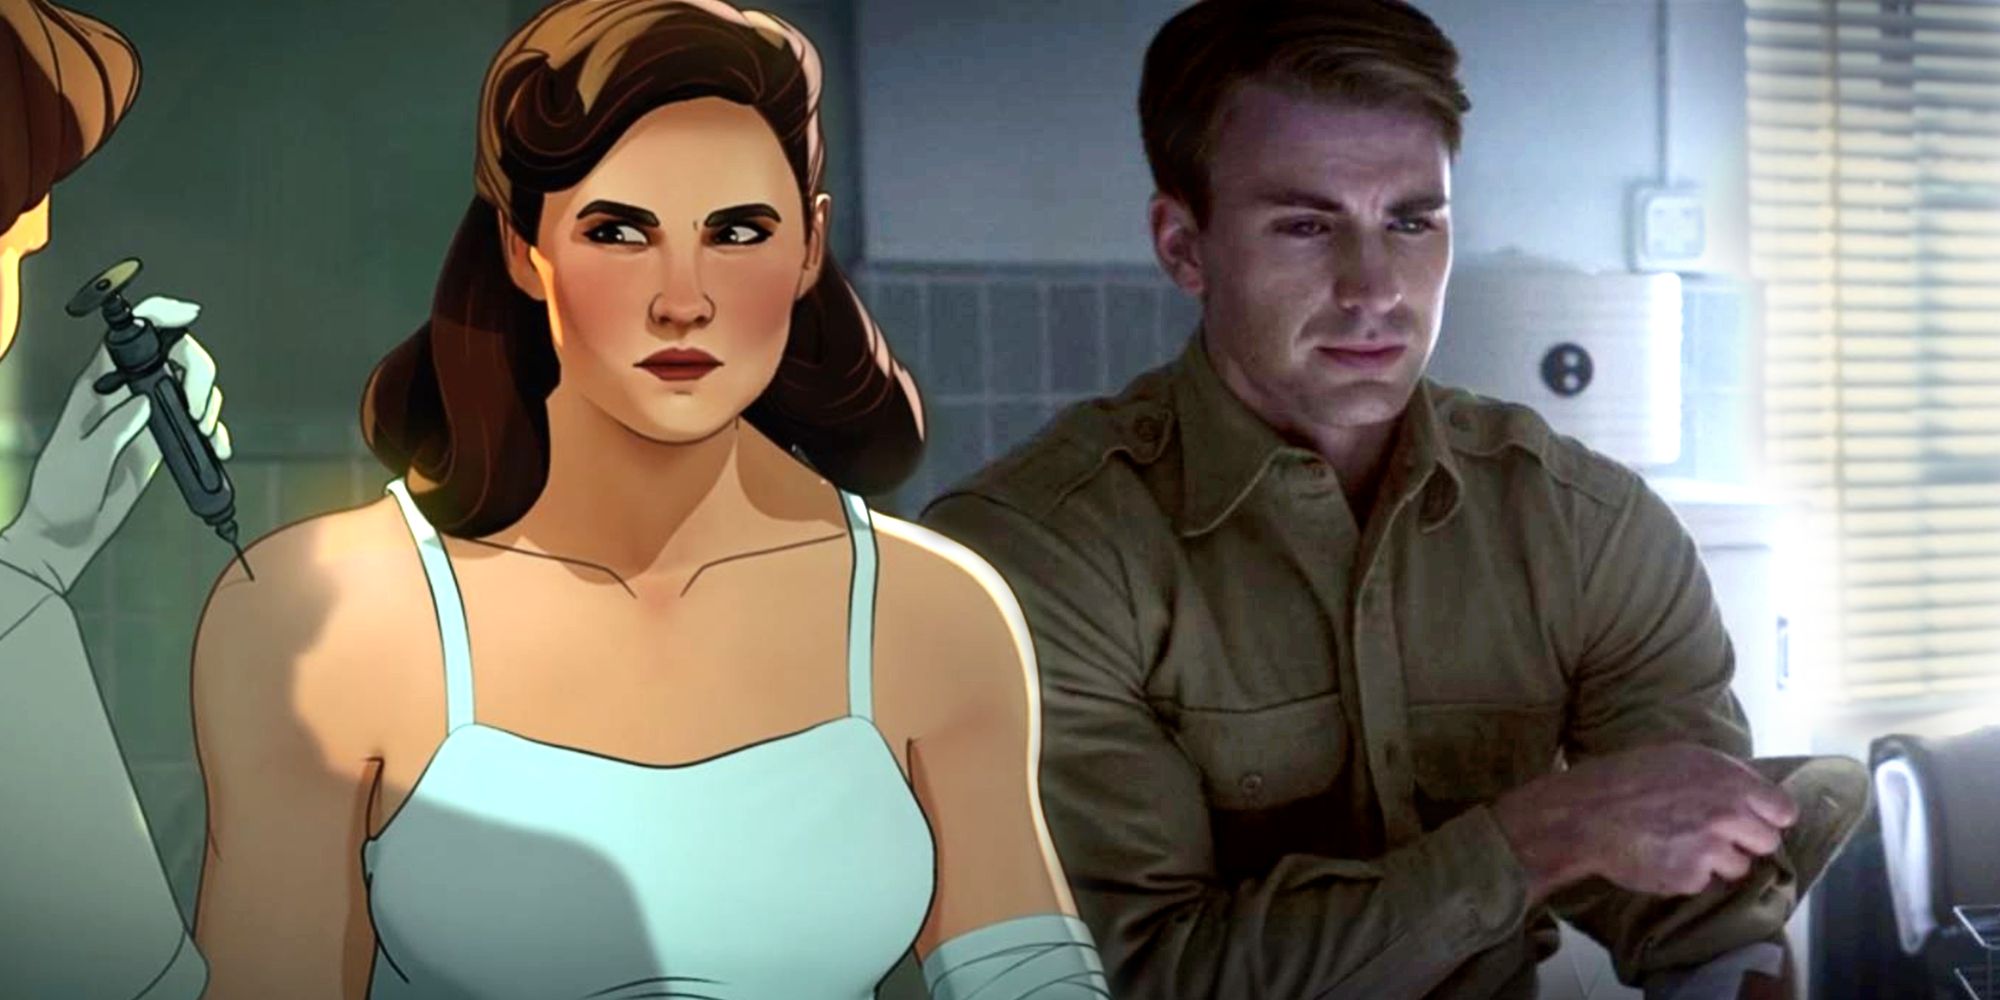 What If's Peggy Carter and The First Avenger's Steve Rogers